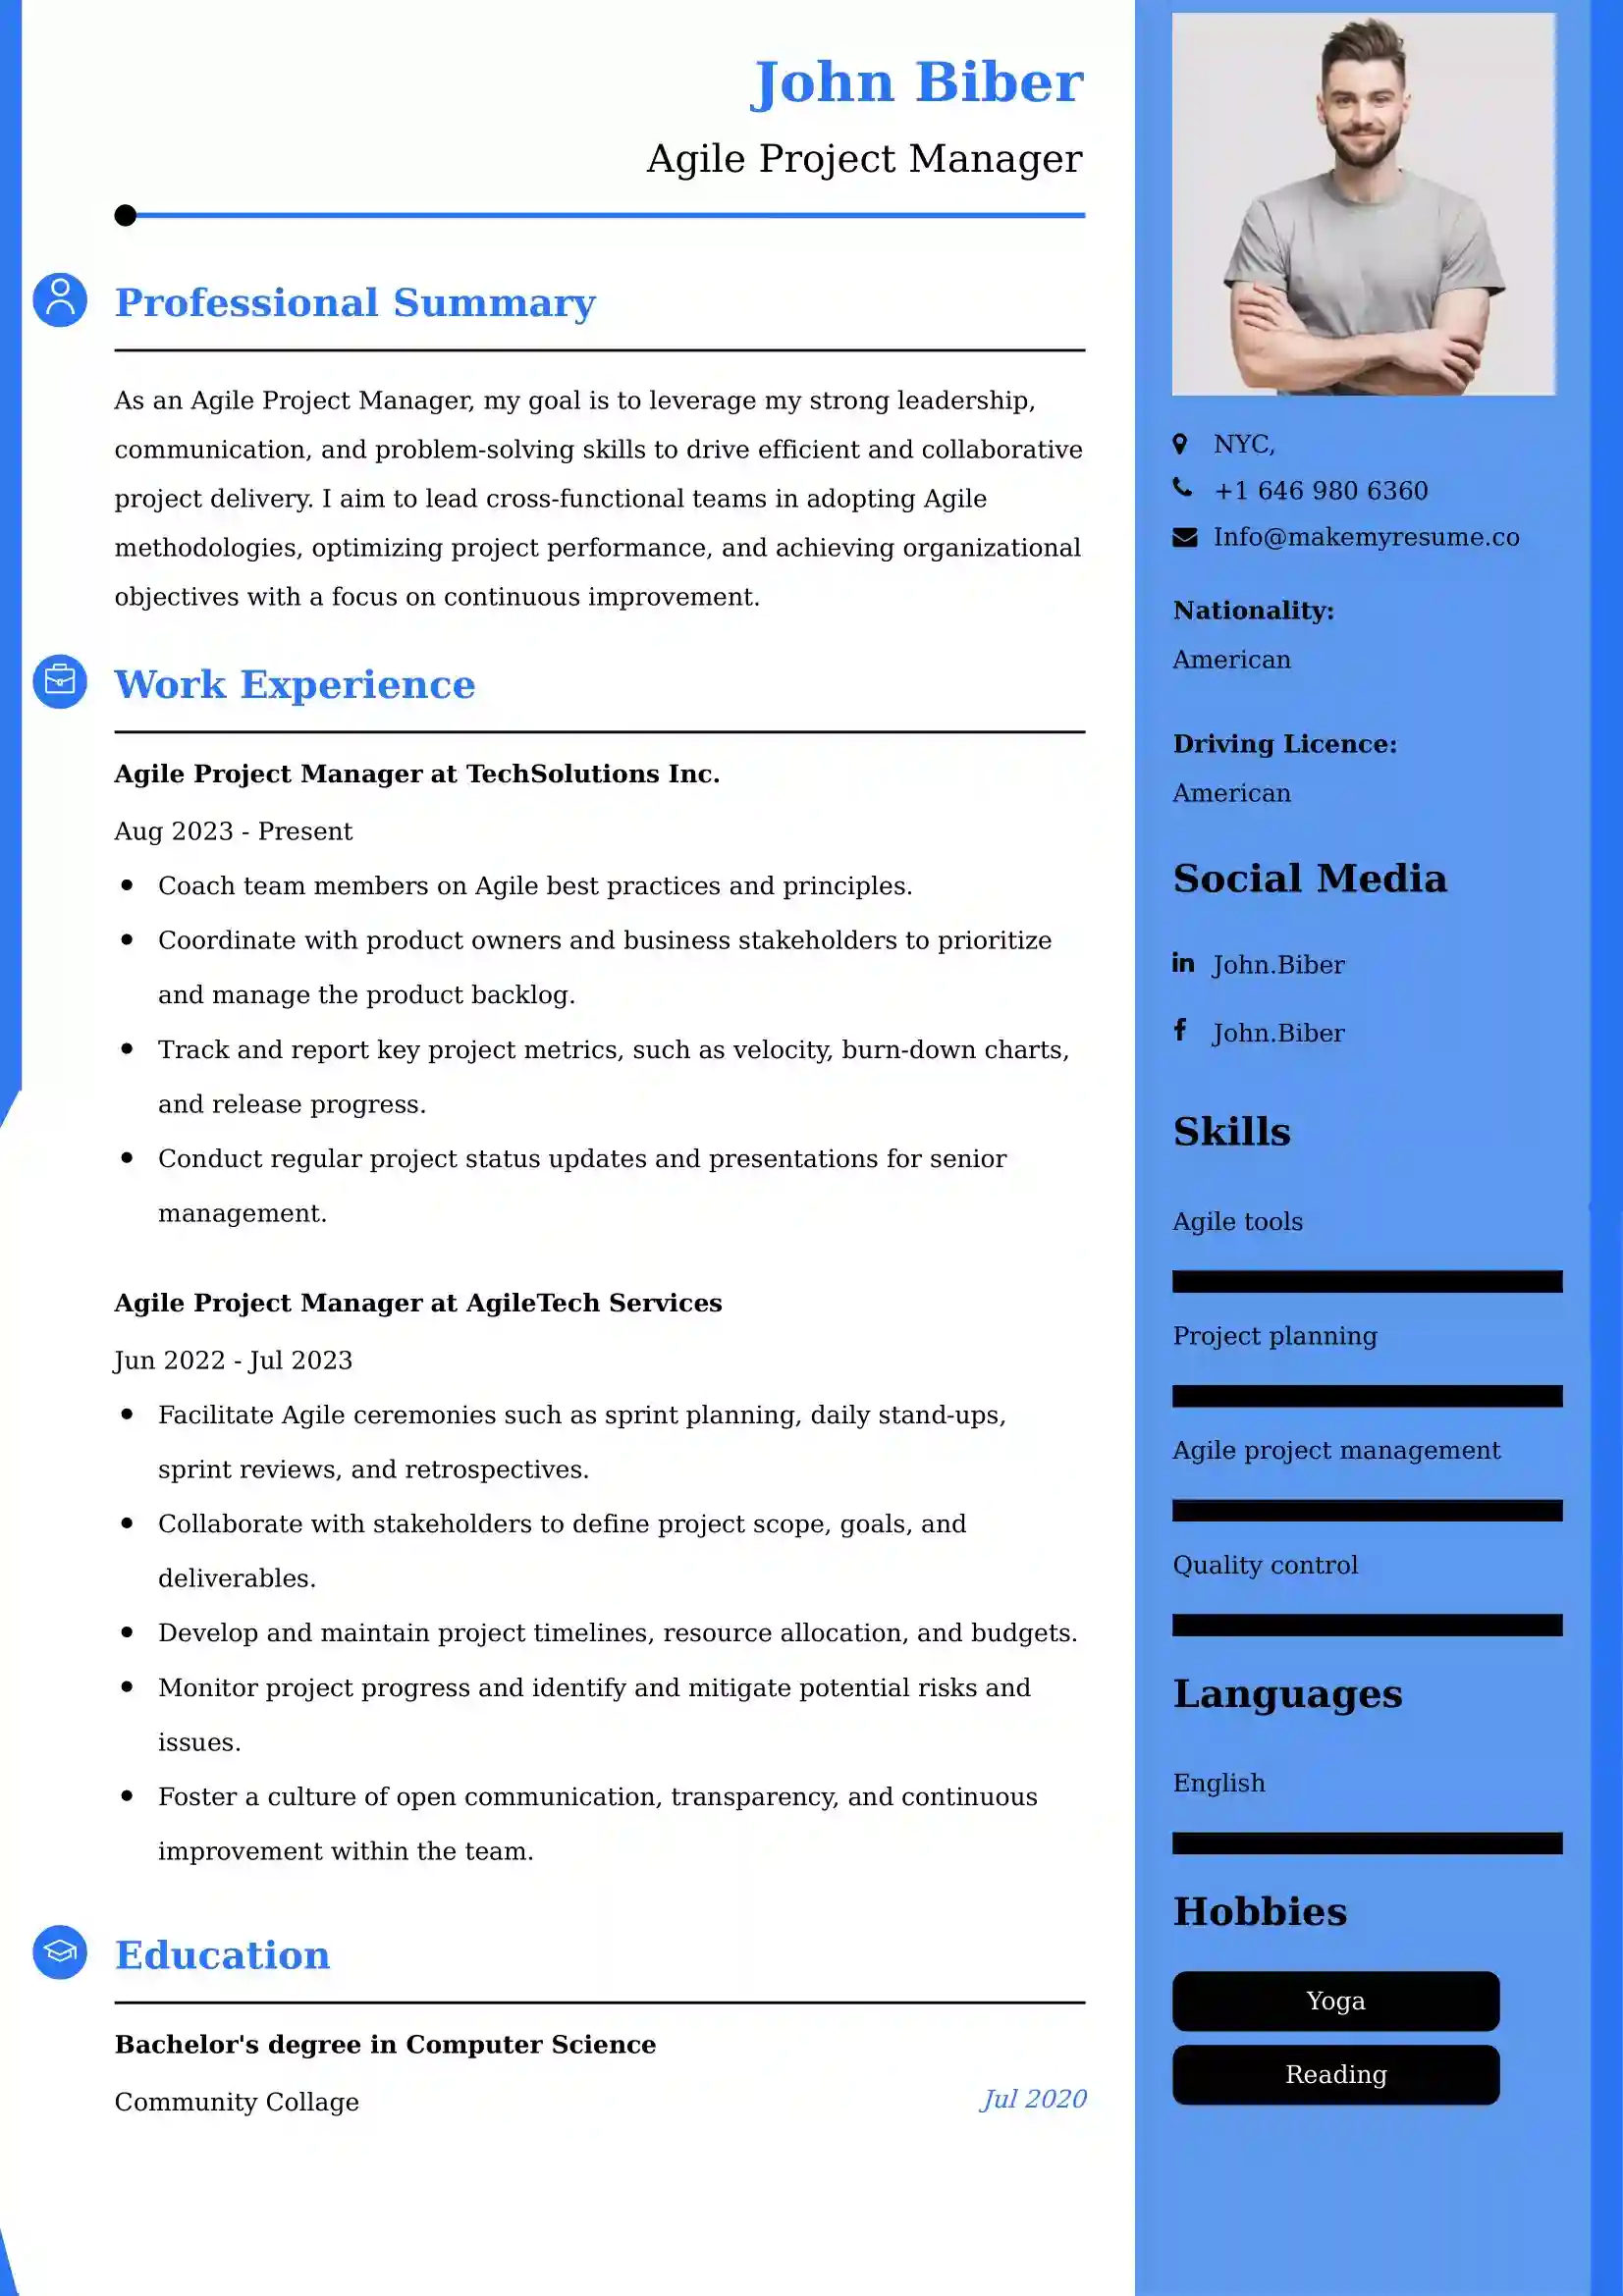 Agile Project Manager Resume Examples India